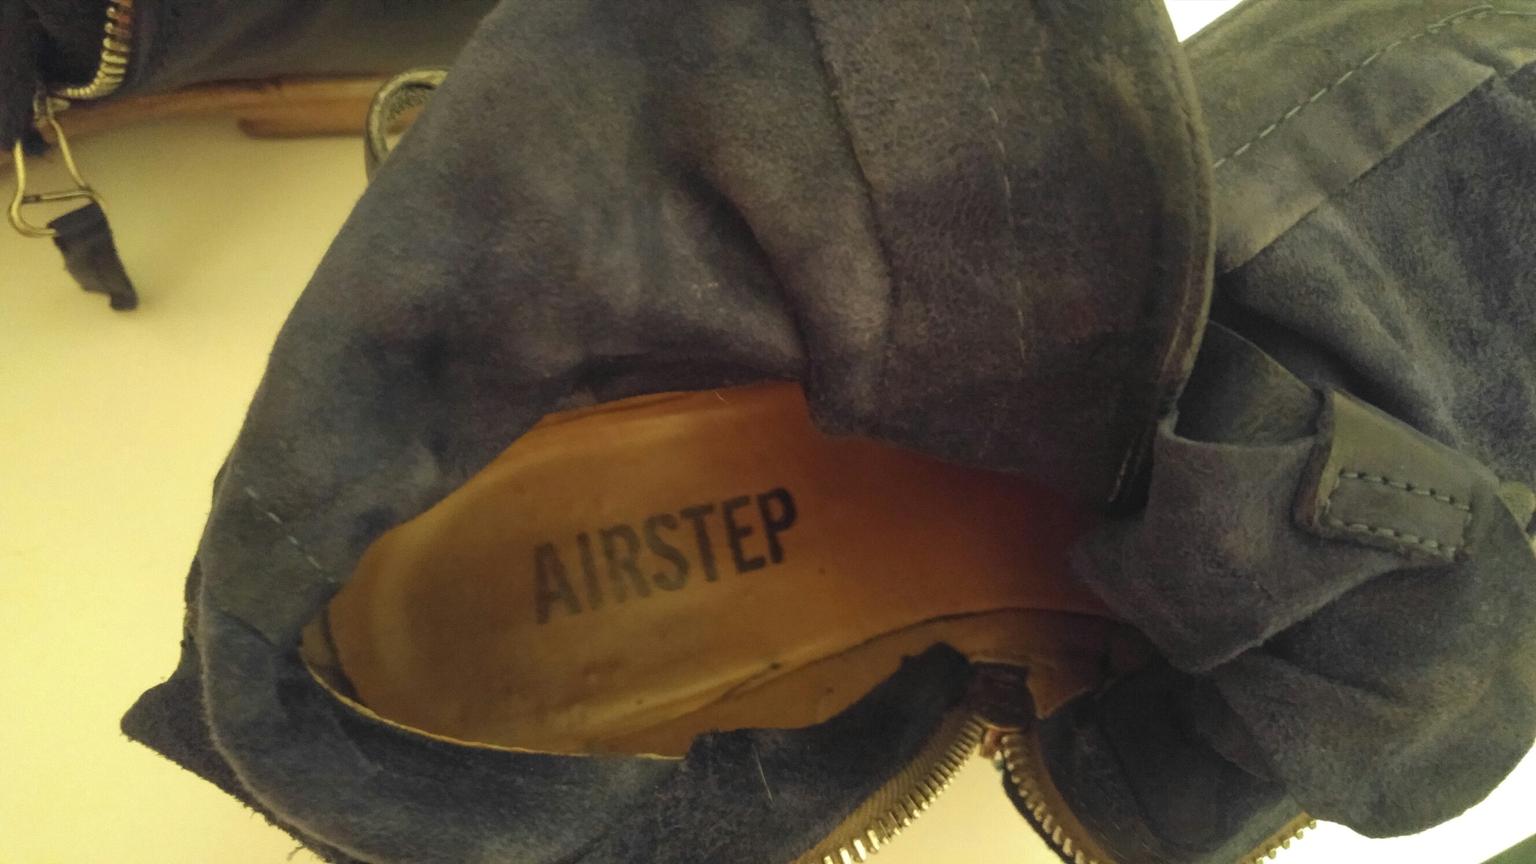 Airstep A S 98 Leather Boots Eu41 Uk8 In B92 Solihull For 40 00 For Sale Shpock